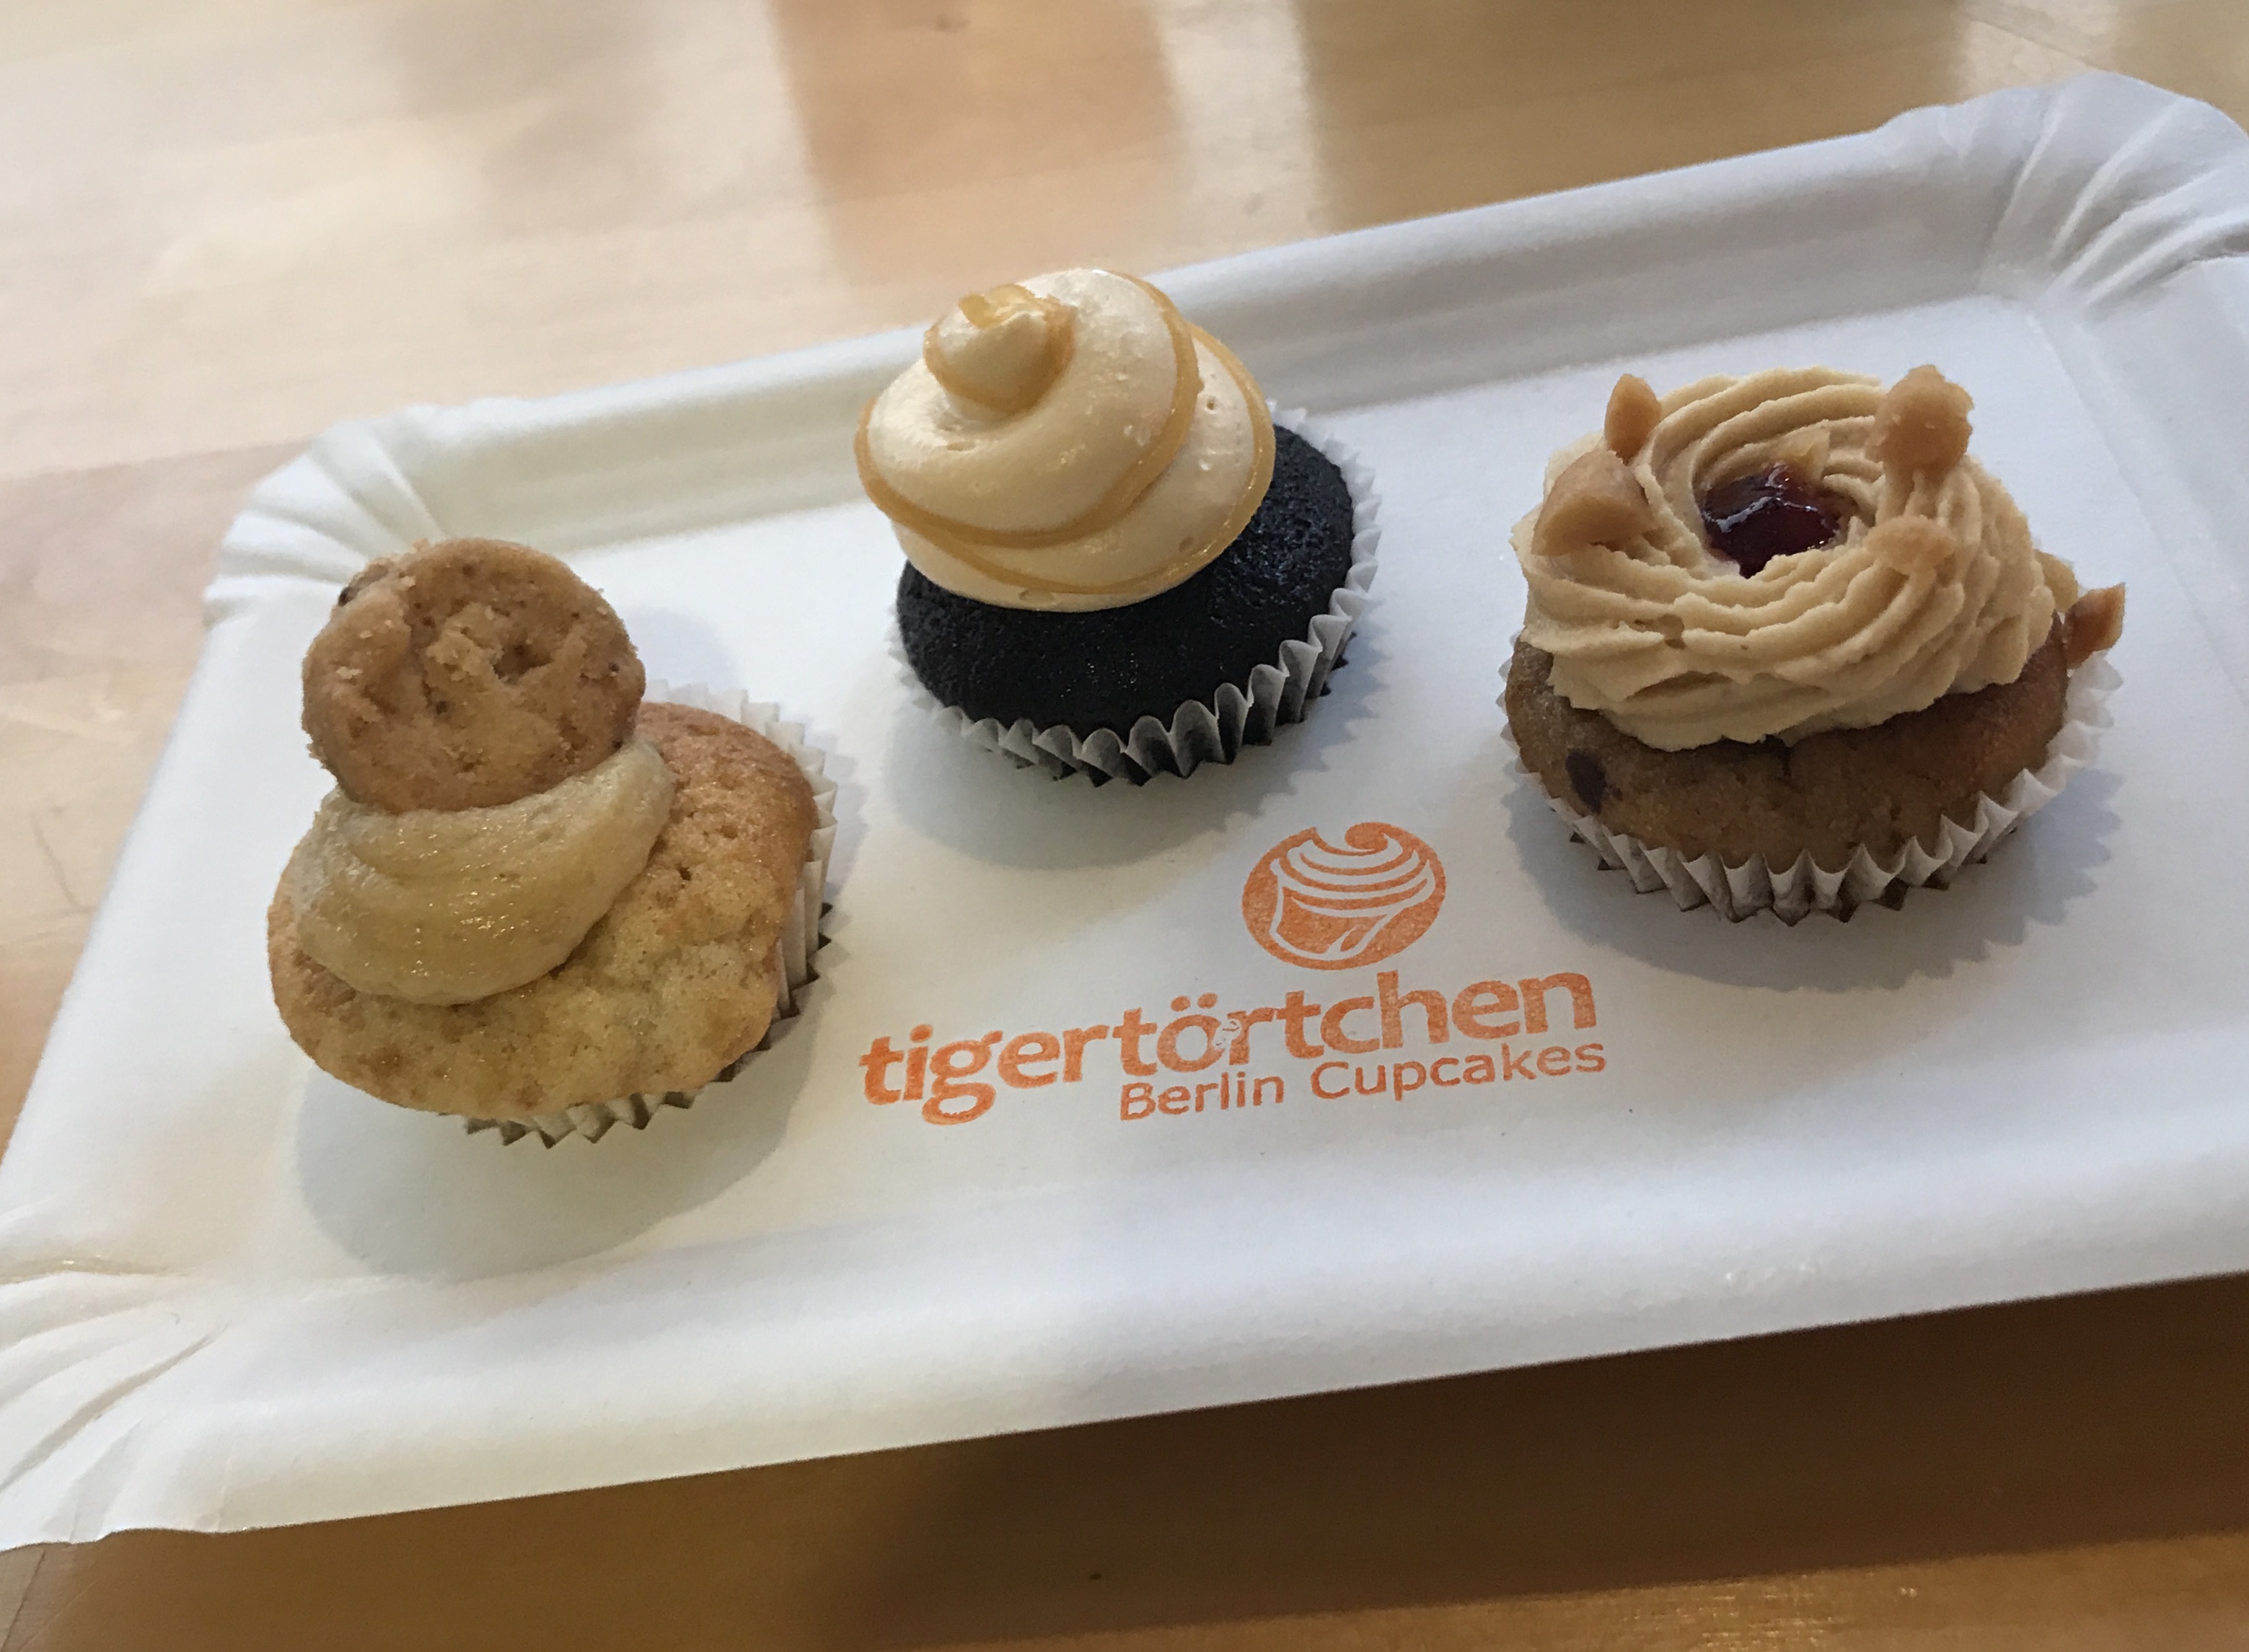 Check these mini cupcakes from Tigertötchen.